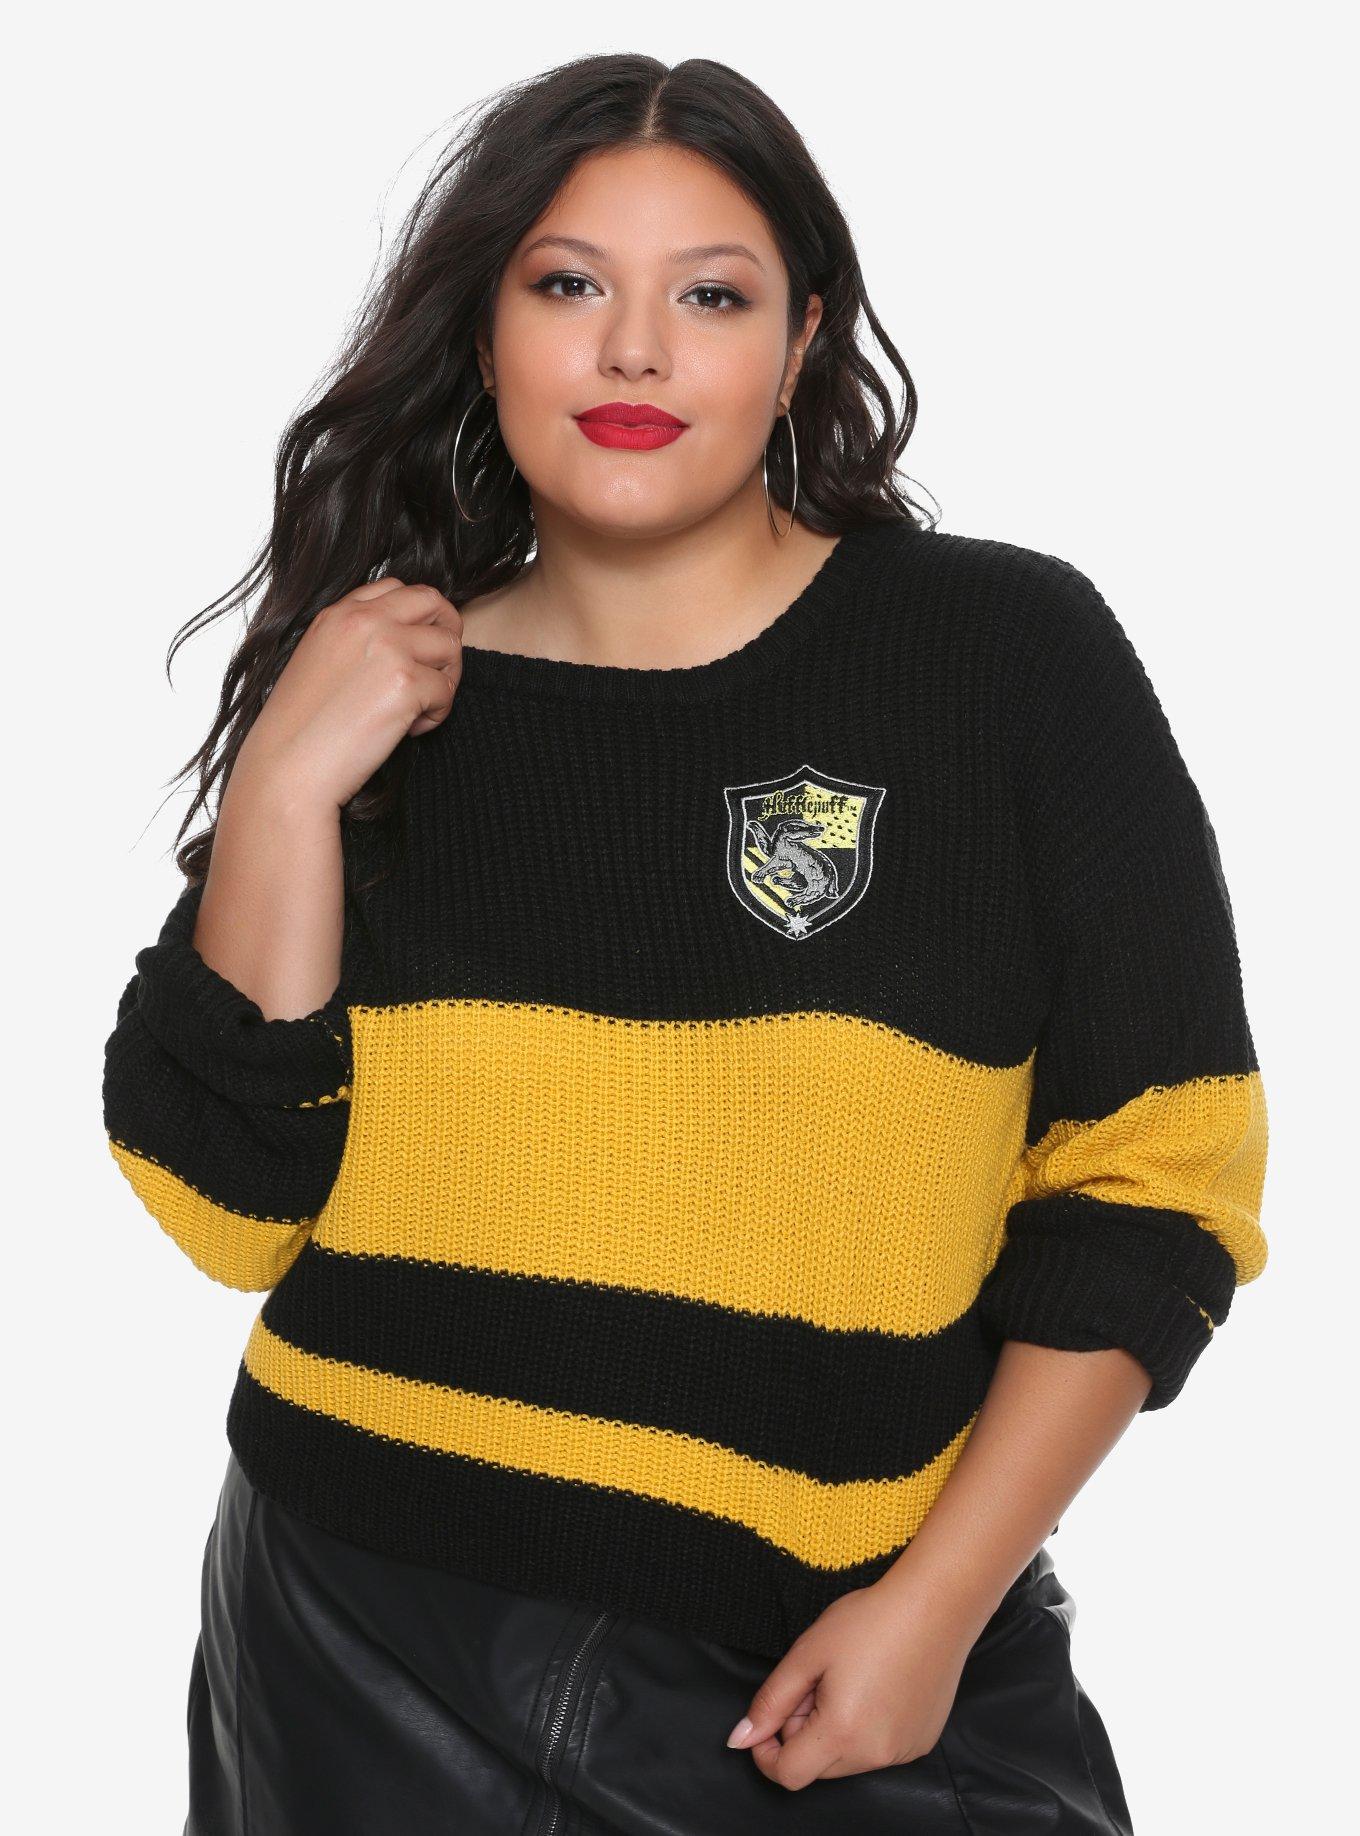 Harry Potter Hufflepuff Girls Quidditch Sweater Plus Size, BLACK, hi-res